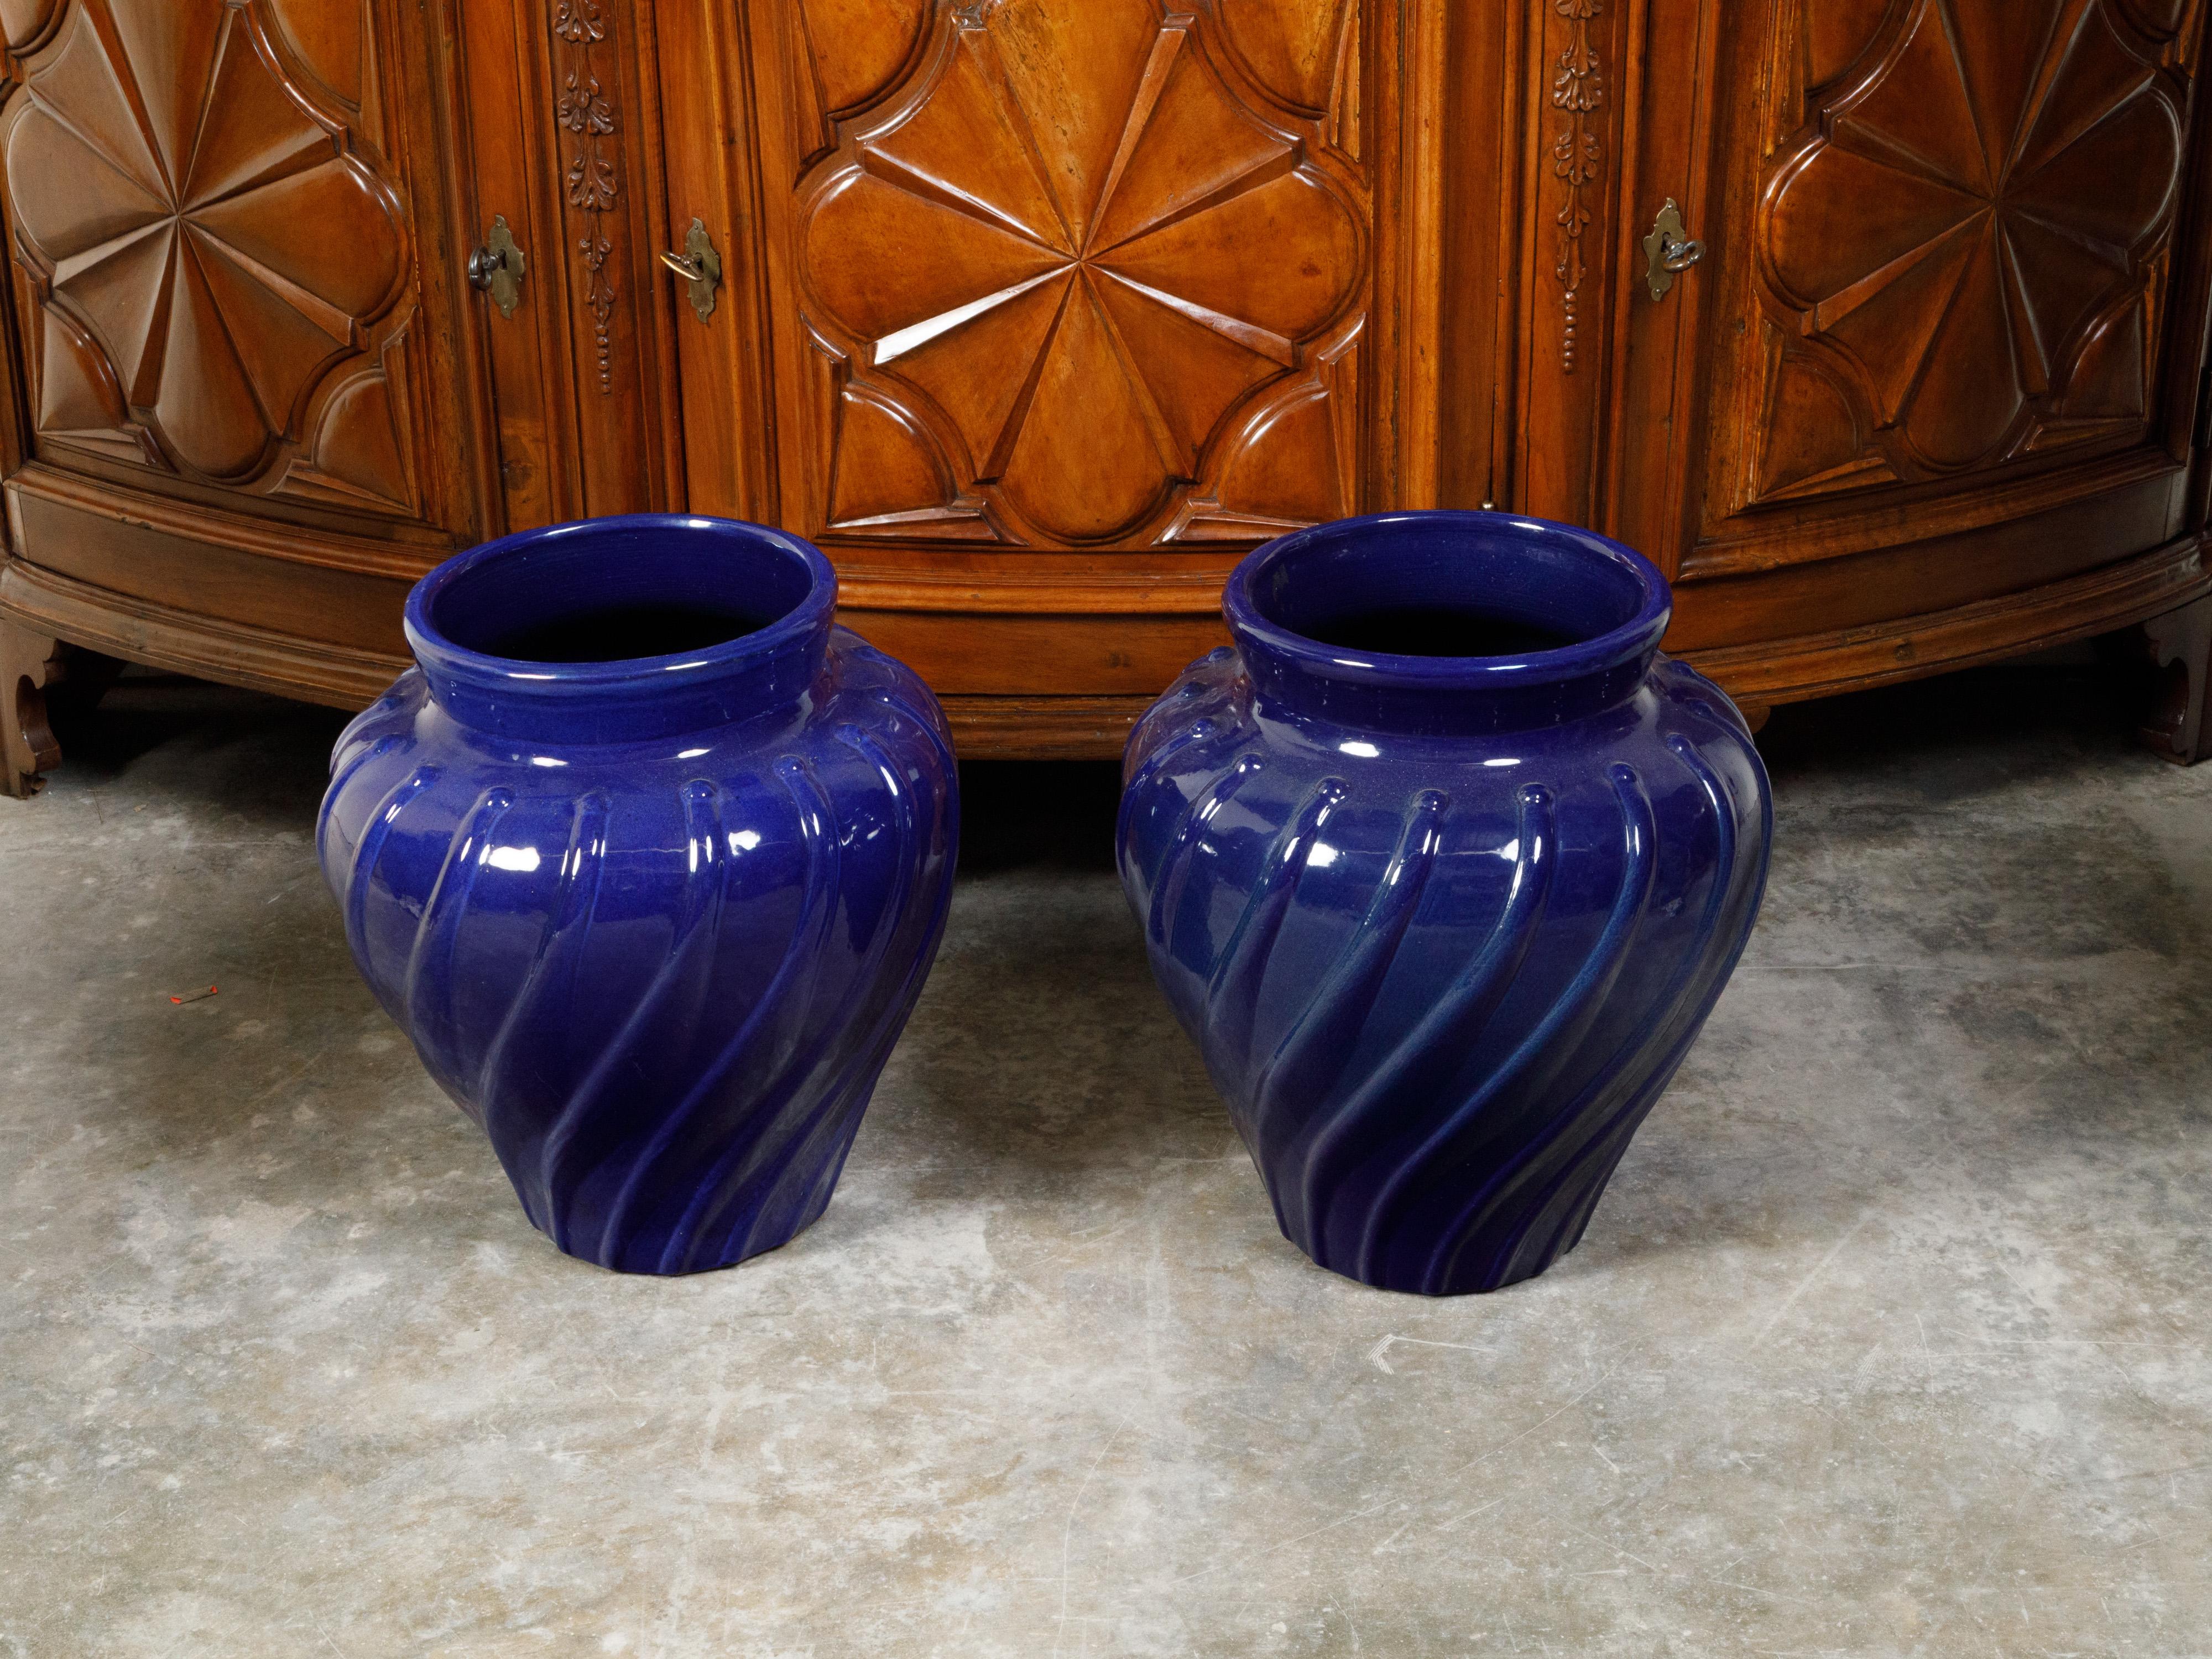 Pair of 1920s Cobalt Blue Pottery Planters with Wavy Patterns For Sale 1